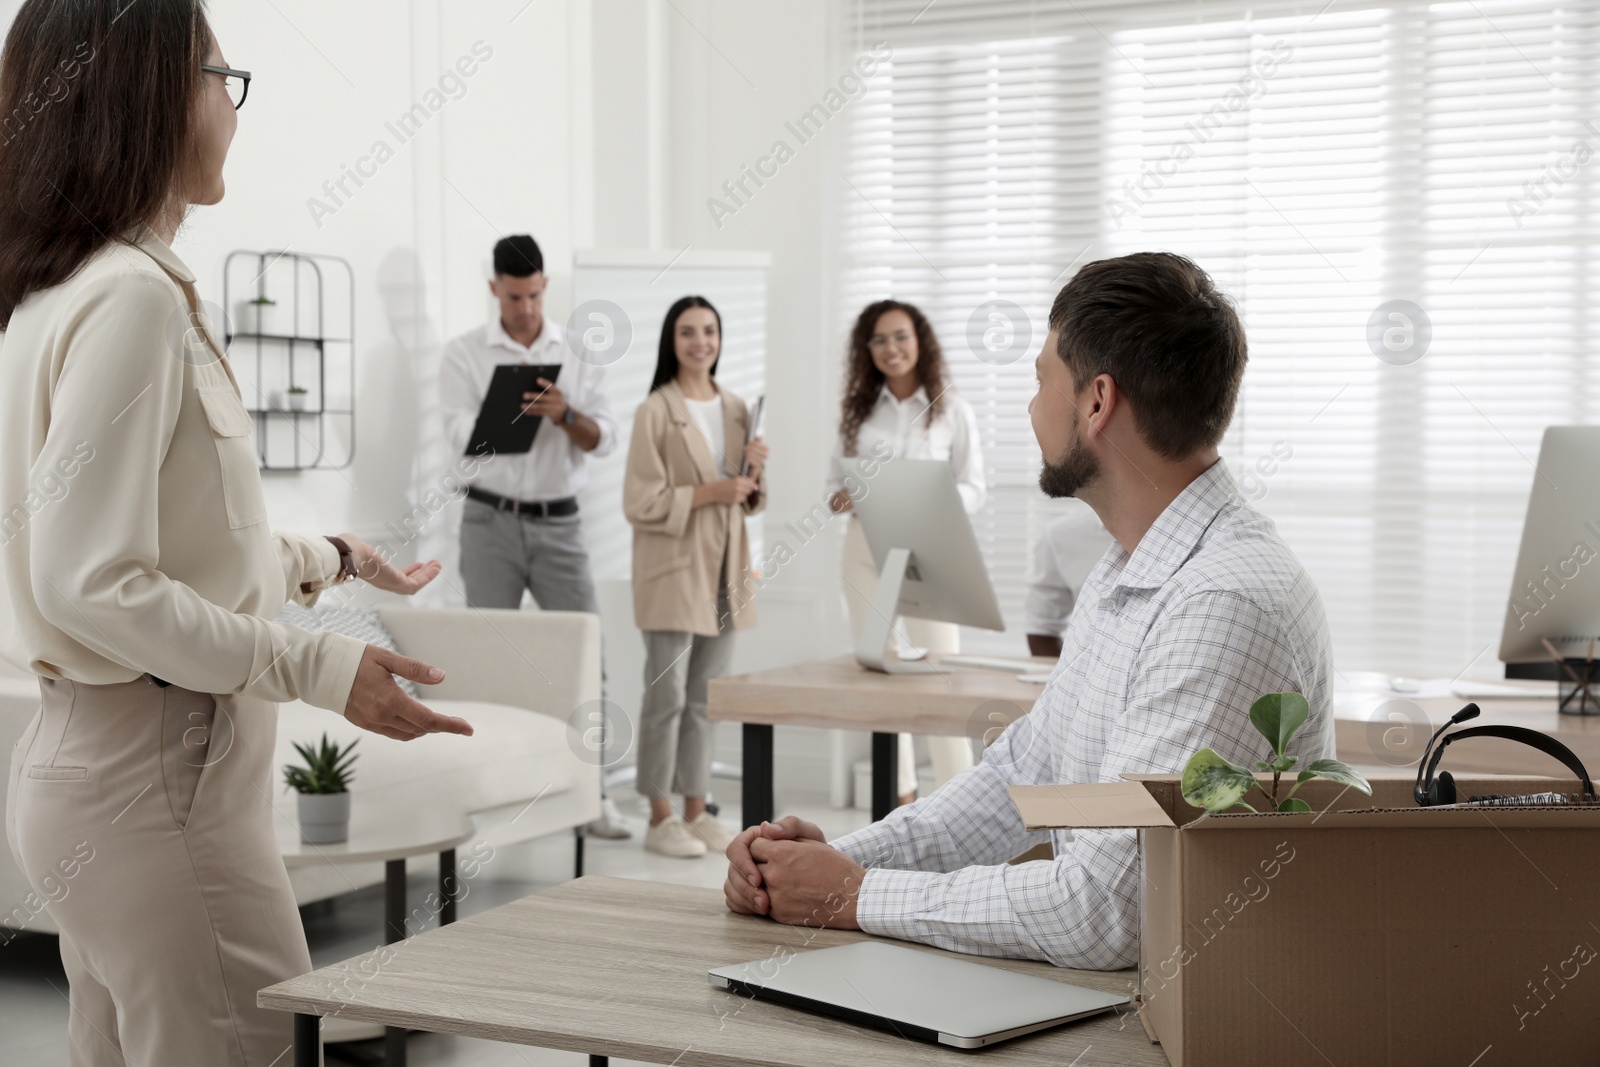 Photo of Boss introducing new employee to coworkers in office